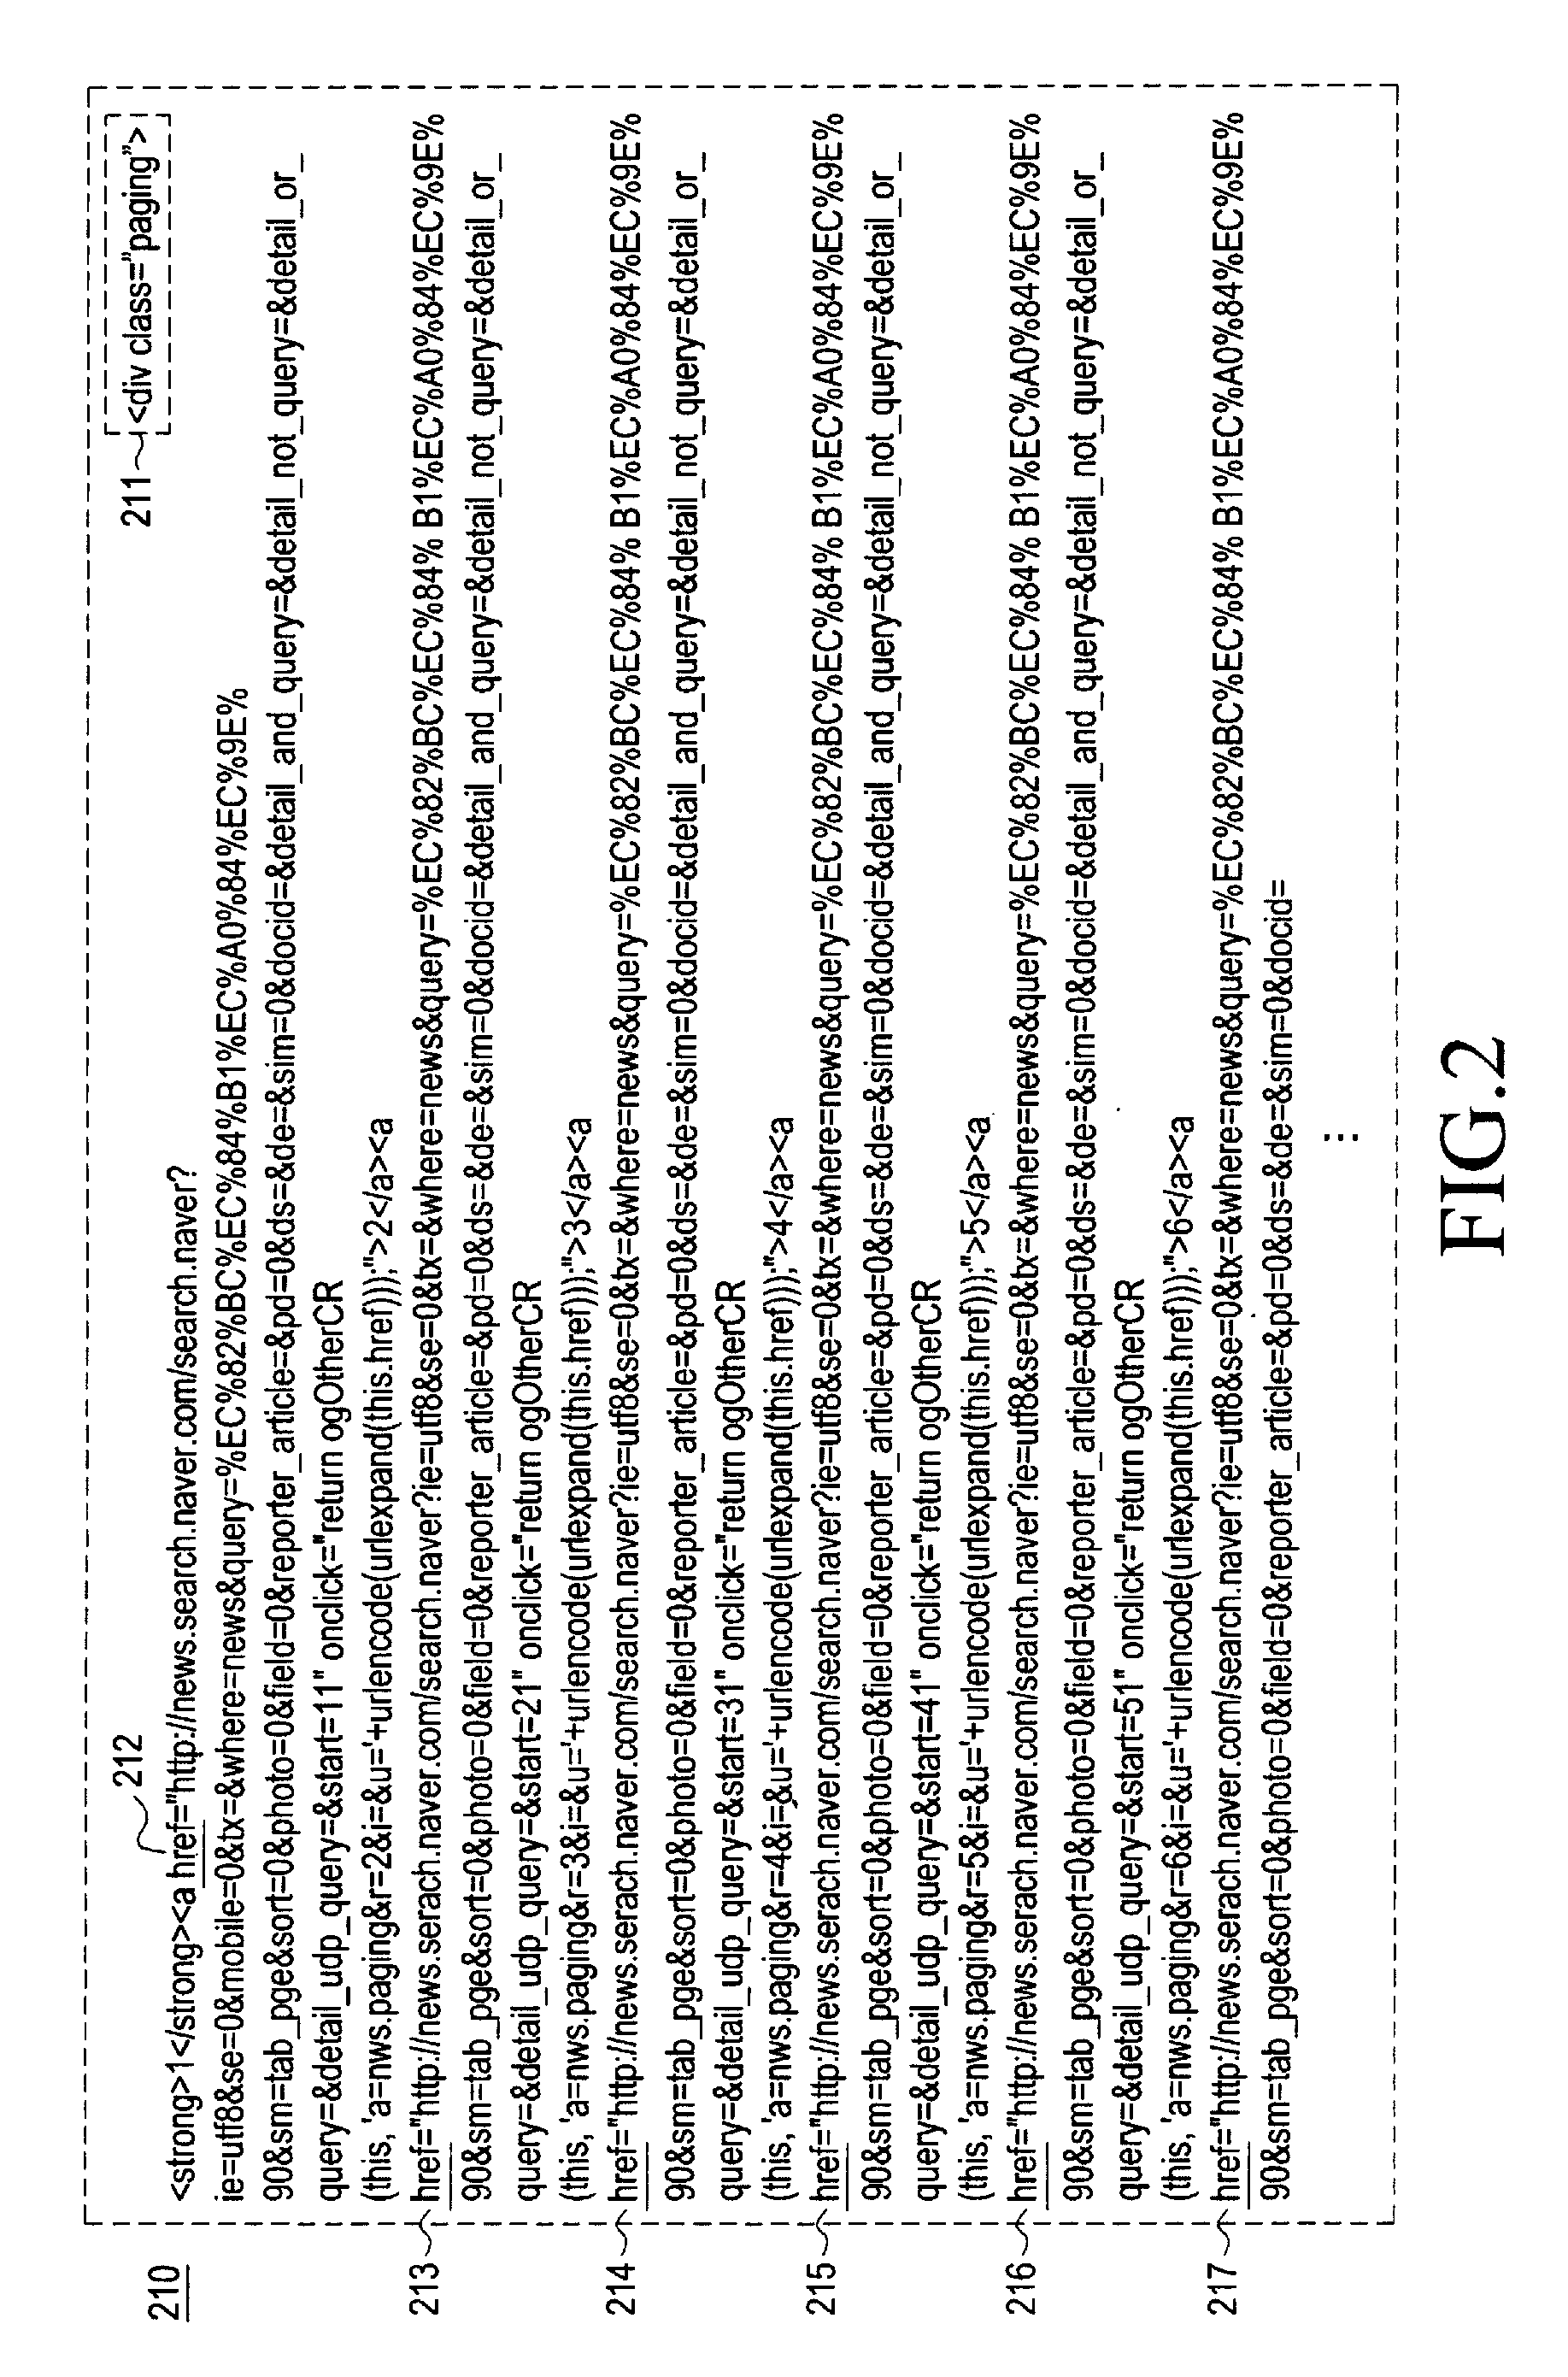 Method and apparatus for providing user interface for internet service